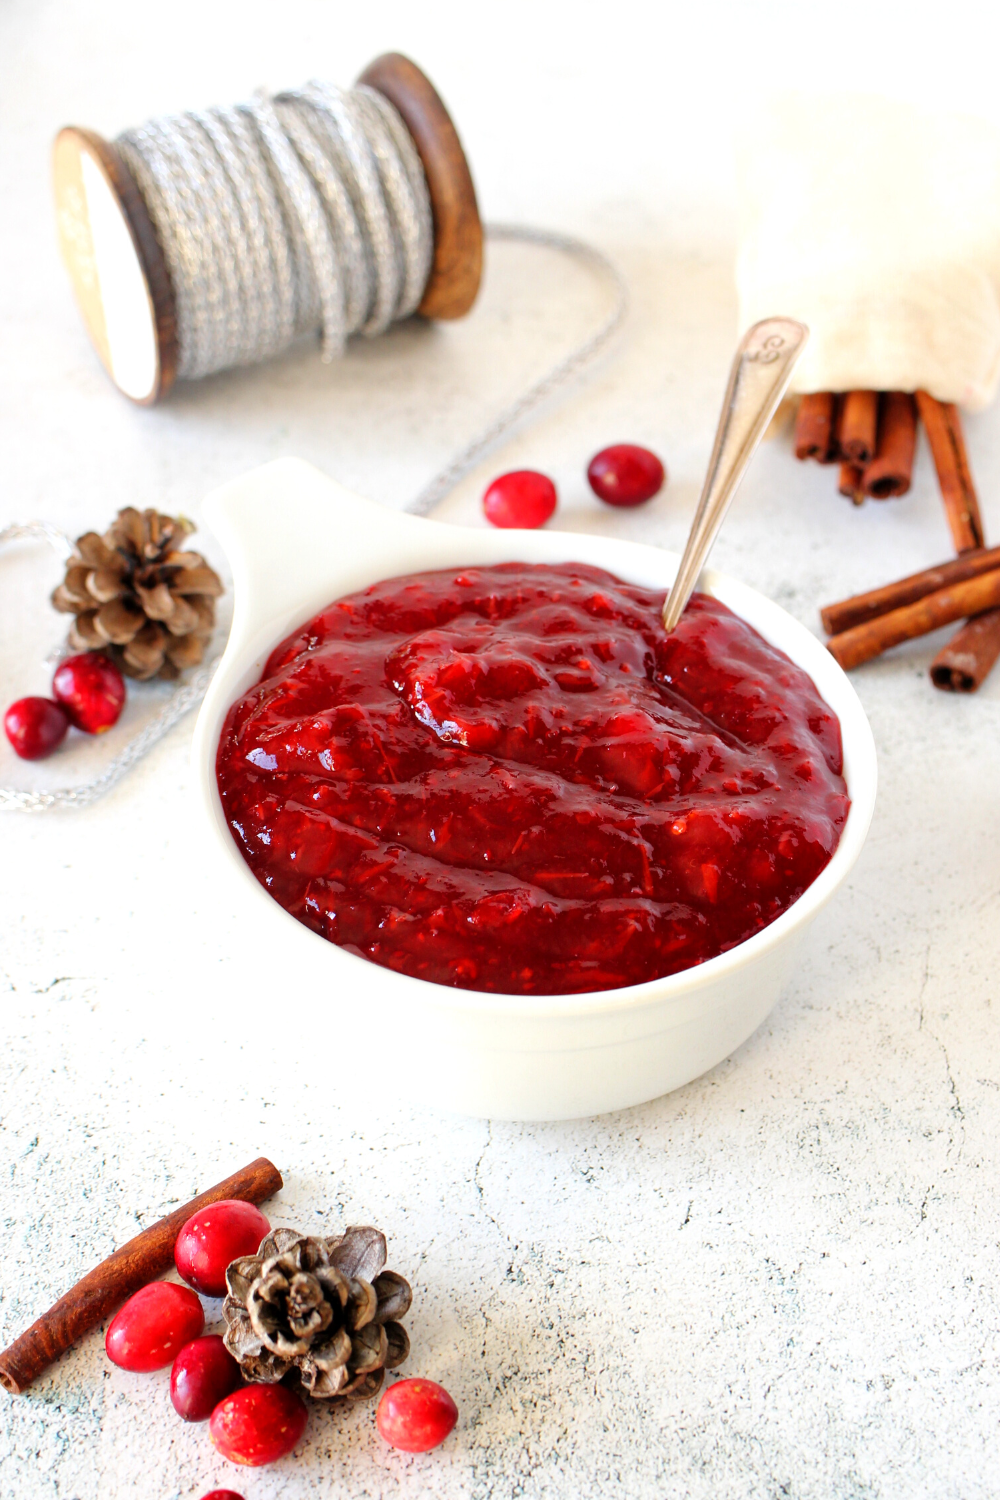 Easy Sugar-free homemade Cranberry orange sauce after firming in the fridge